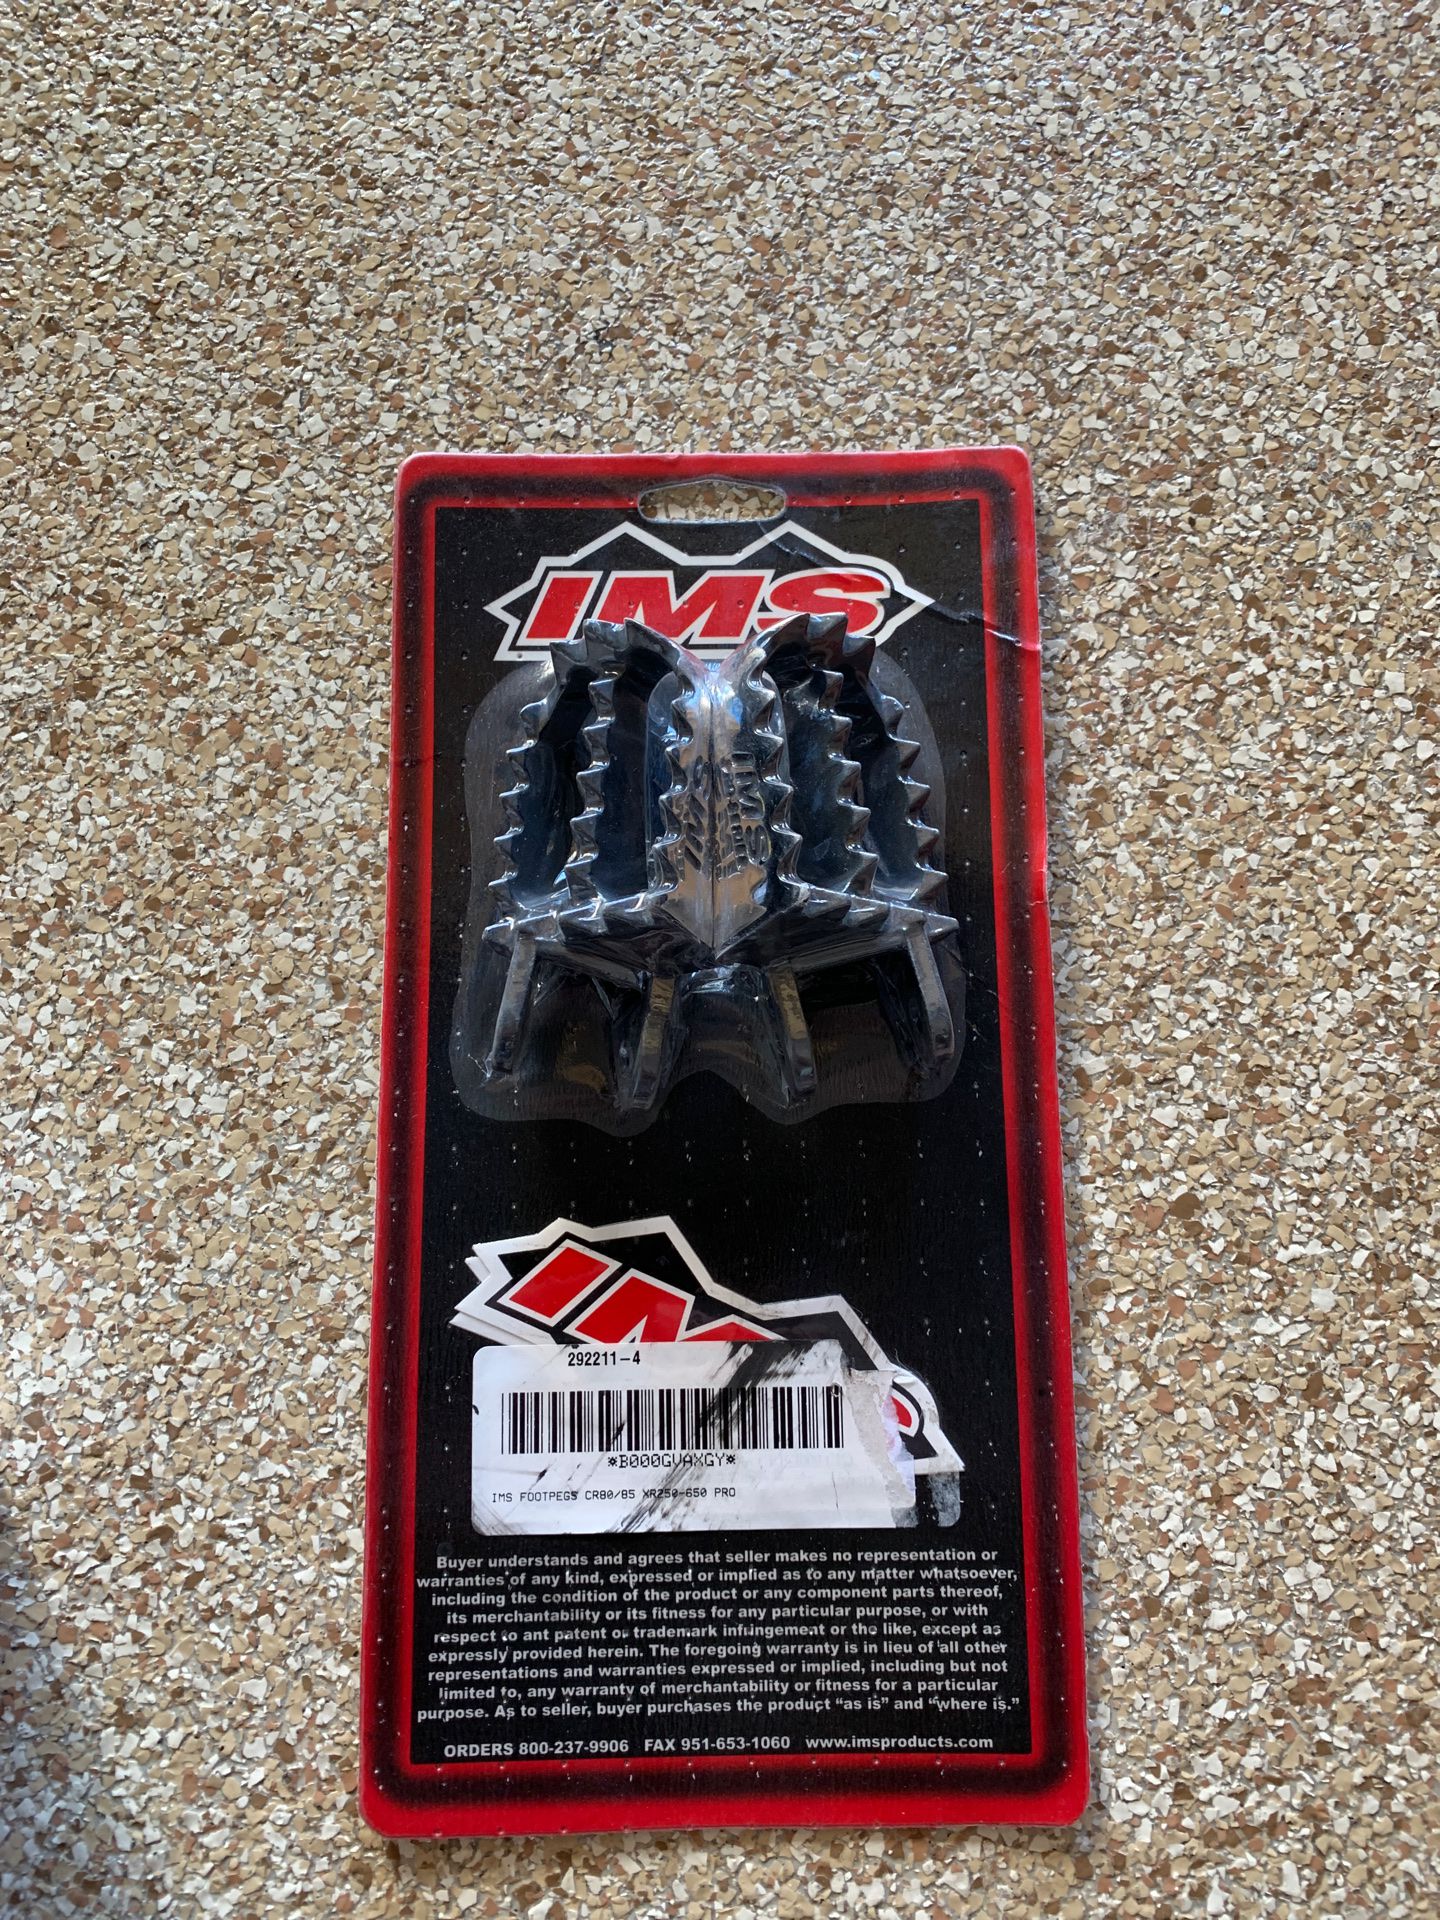 IMS Pro Series Footpegs - Brand New Never Opened